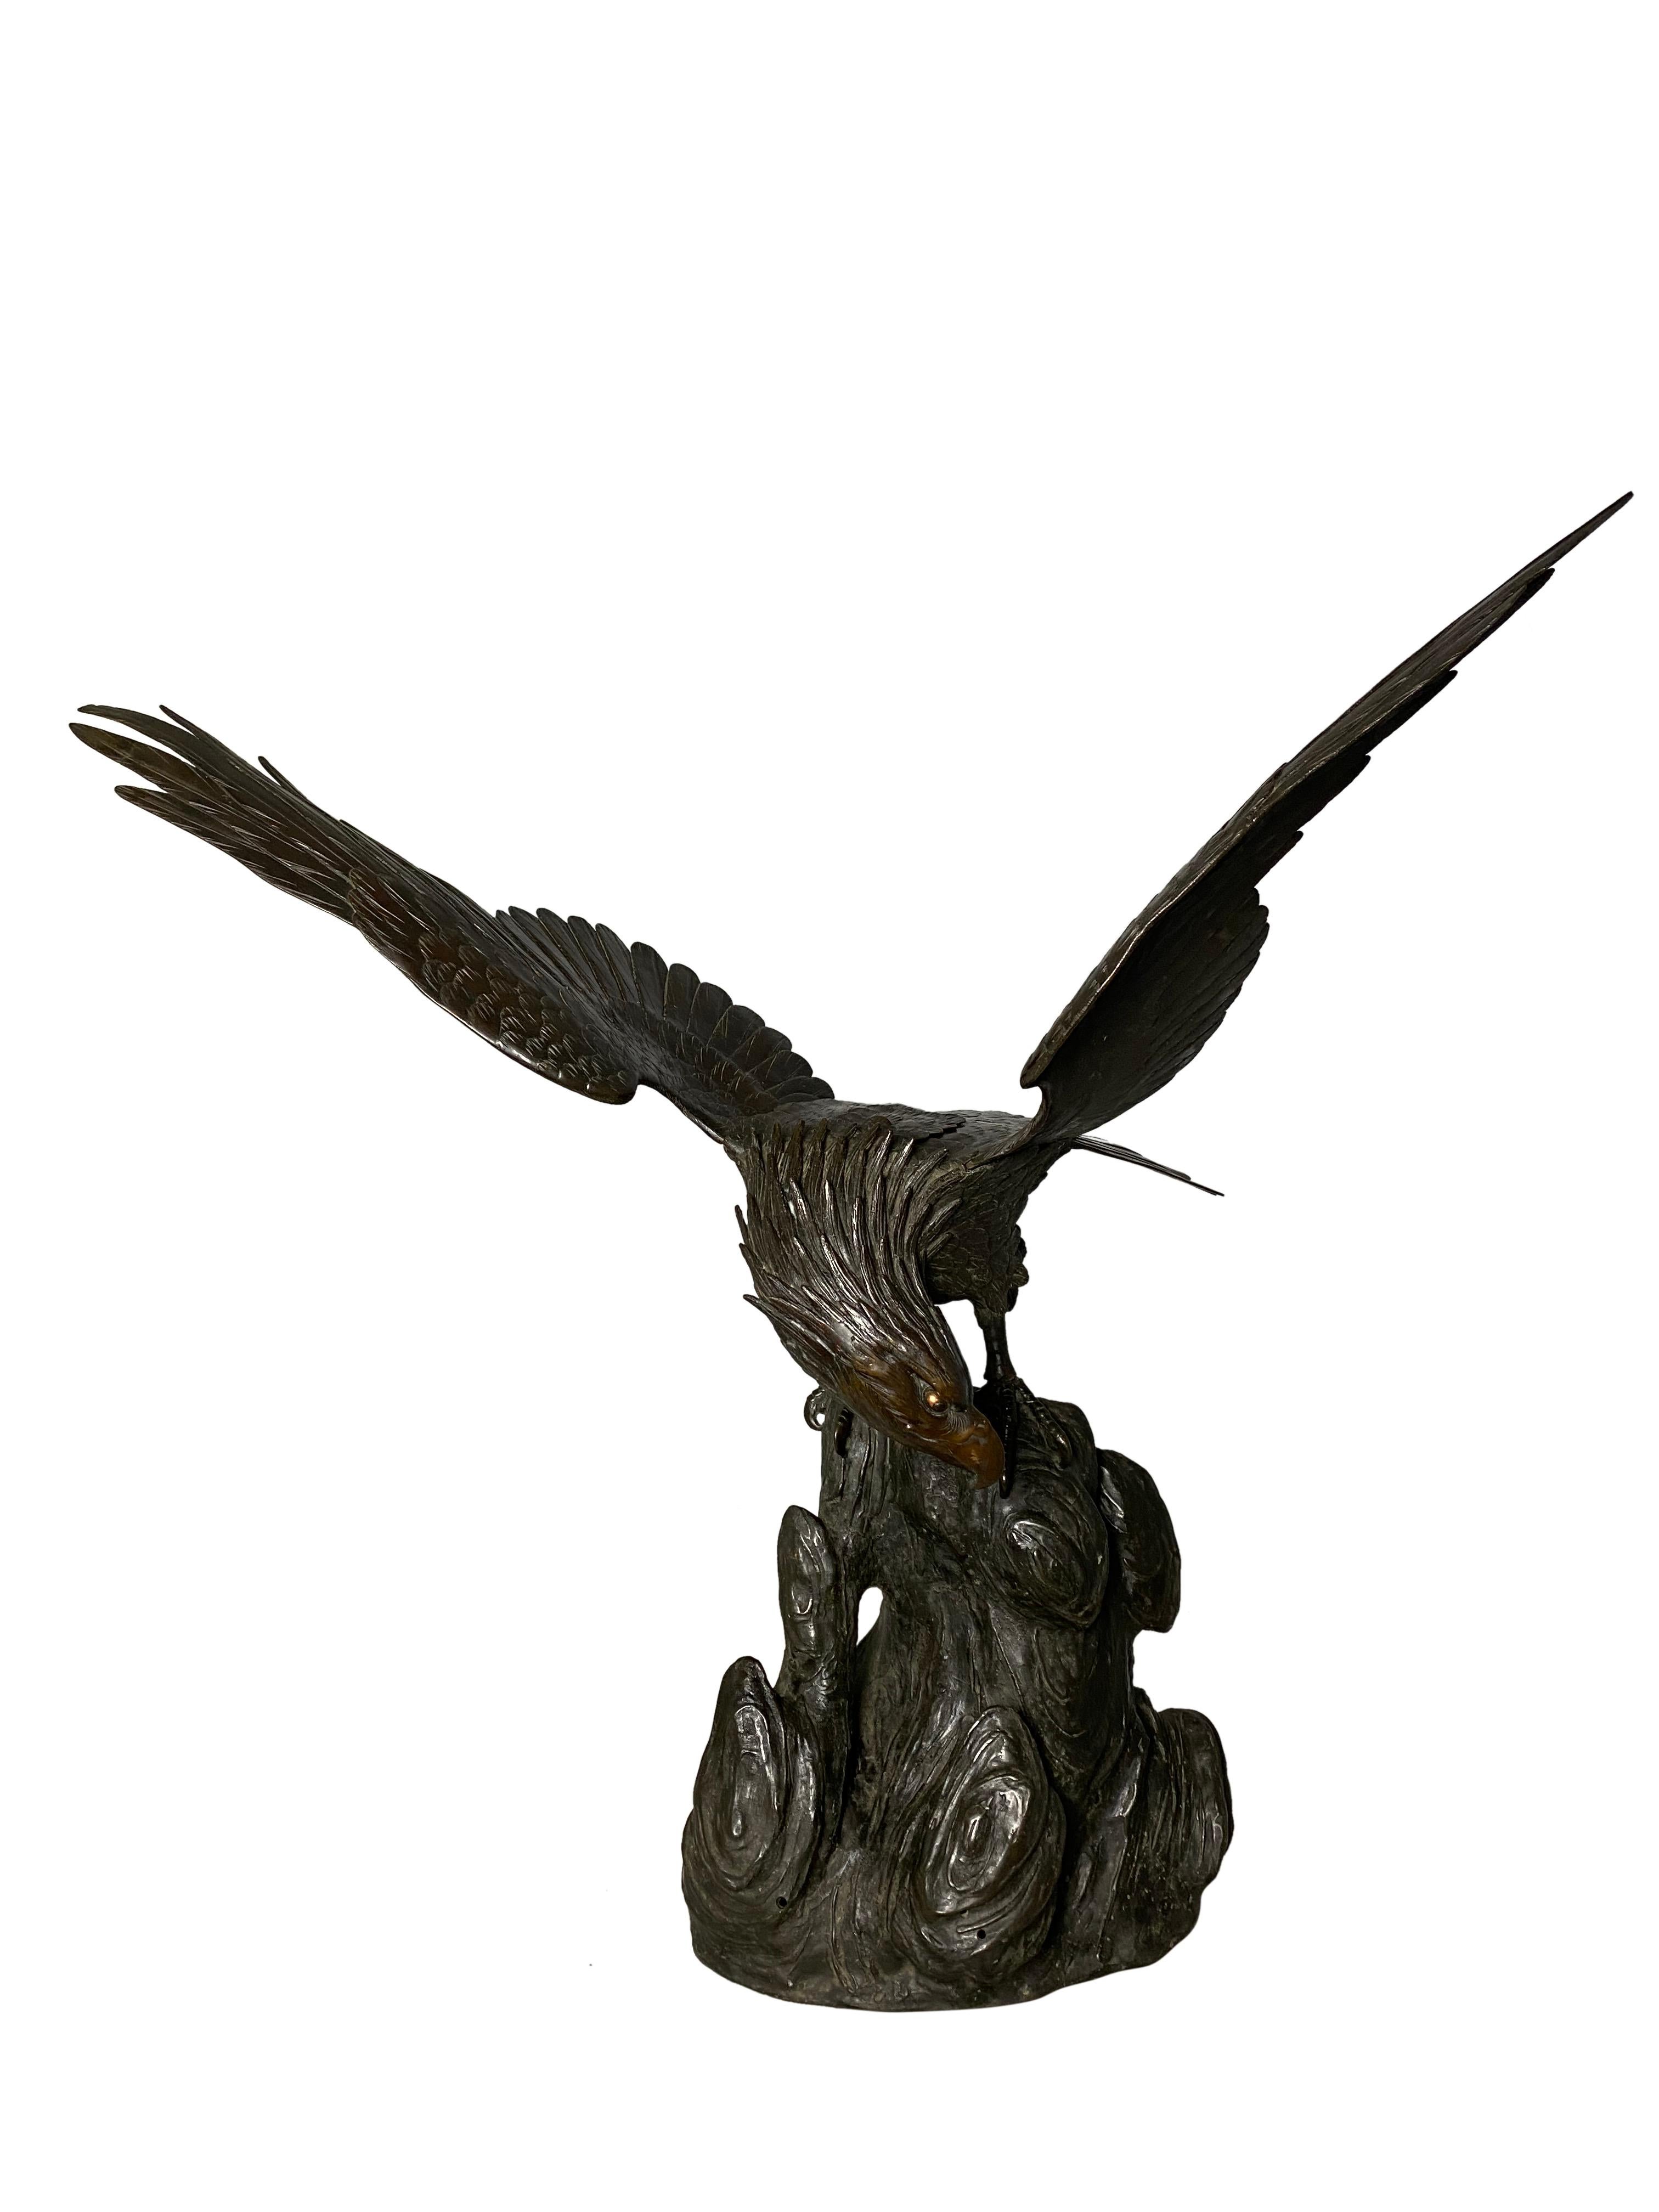 With extended wings, this cast bronze eagle statue has a regal and powerful stance, symbolic of freedom and power. The eagle is further supported by a stable base to be displayed in a handsome room as a showcase piece. 

Dimensions (cm)
H 100,